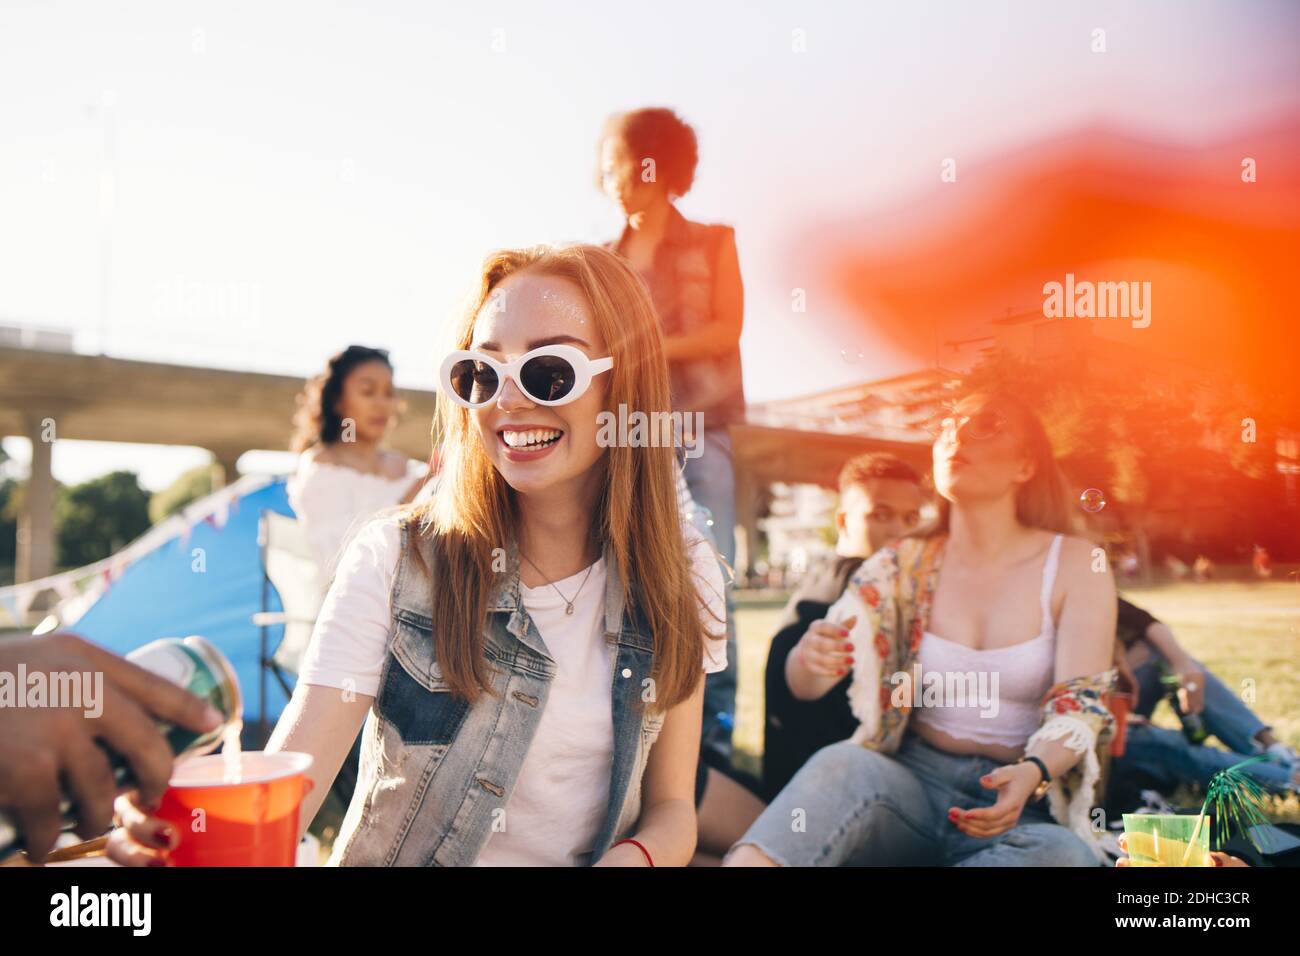 Cropped image of man pouring alcohol to smiling woman at festival Stock Photo